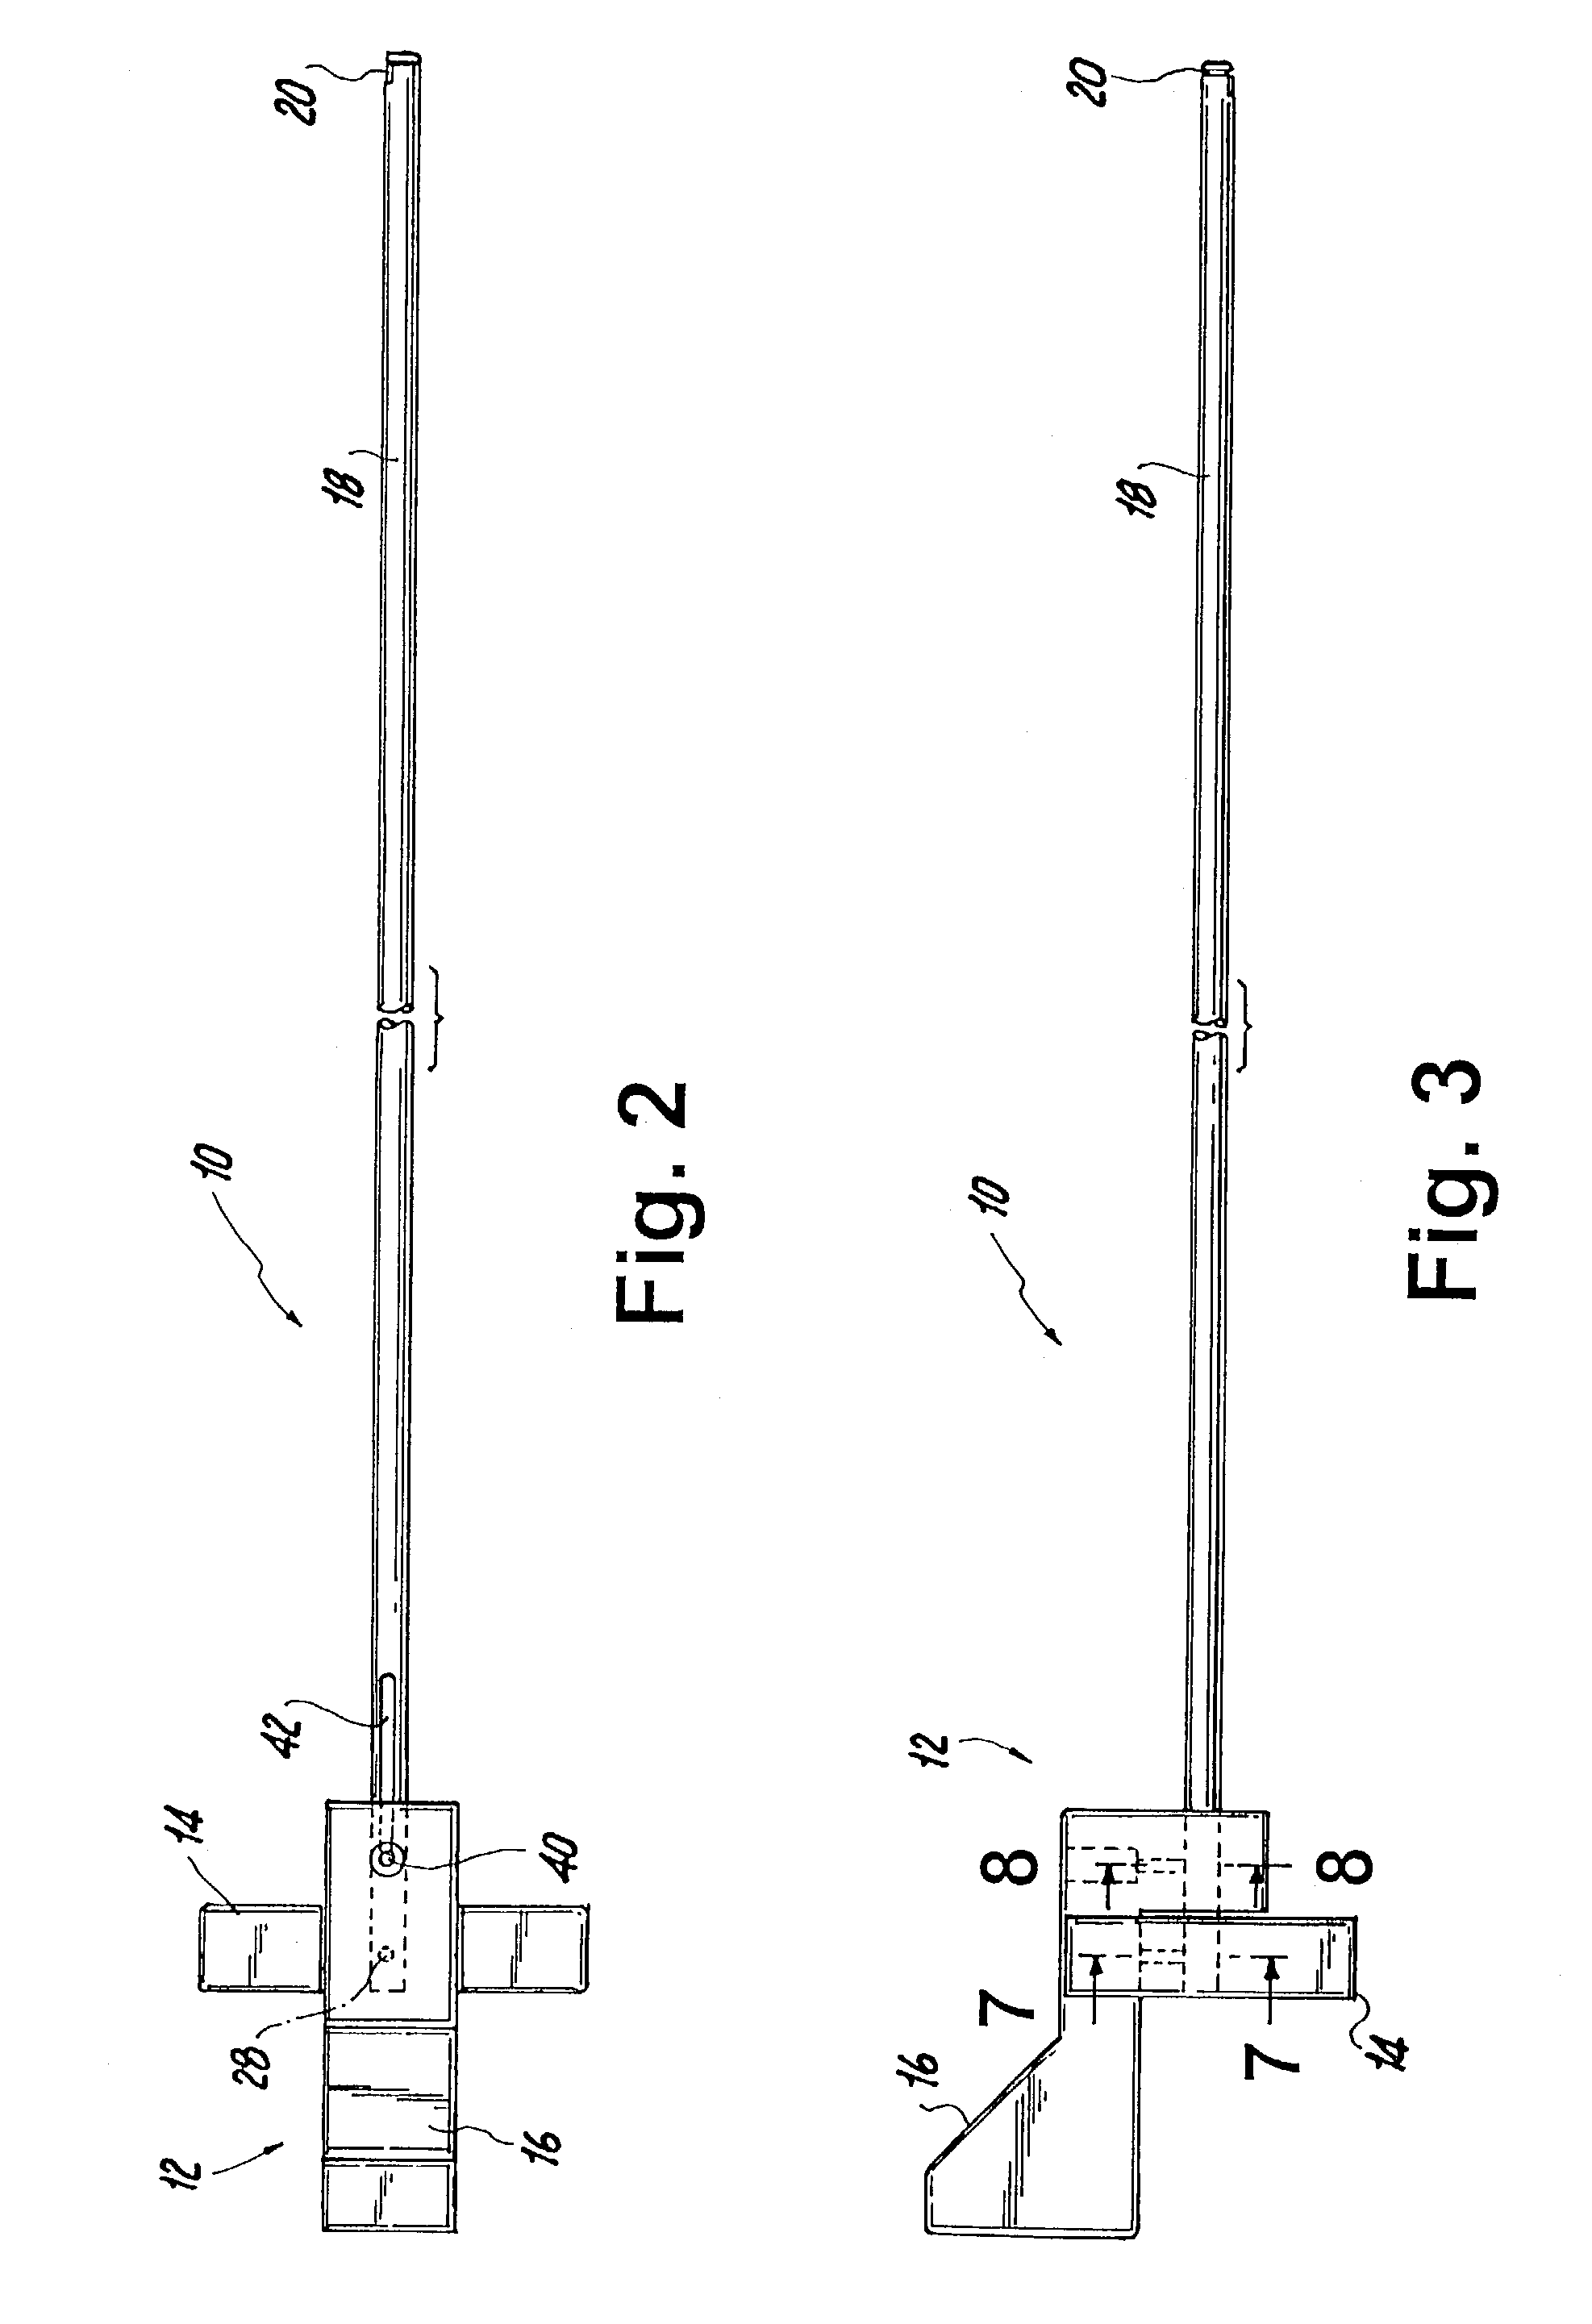 Apparatus for suturing a blood vessel